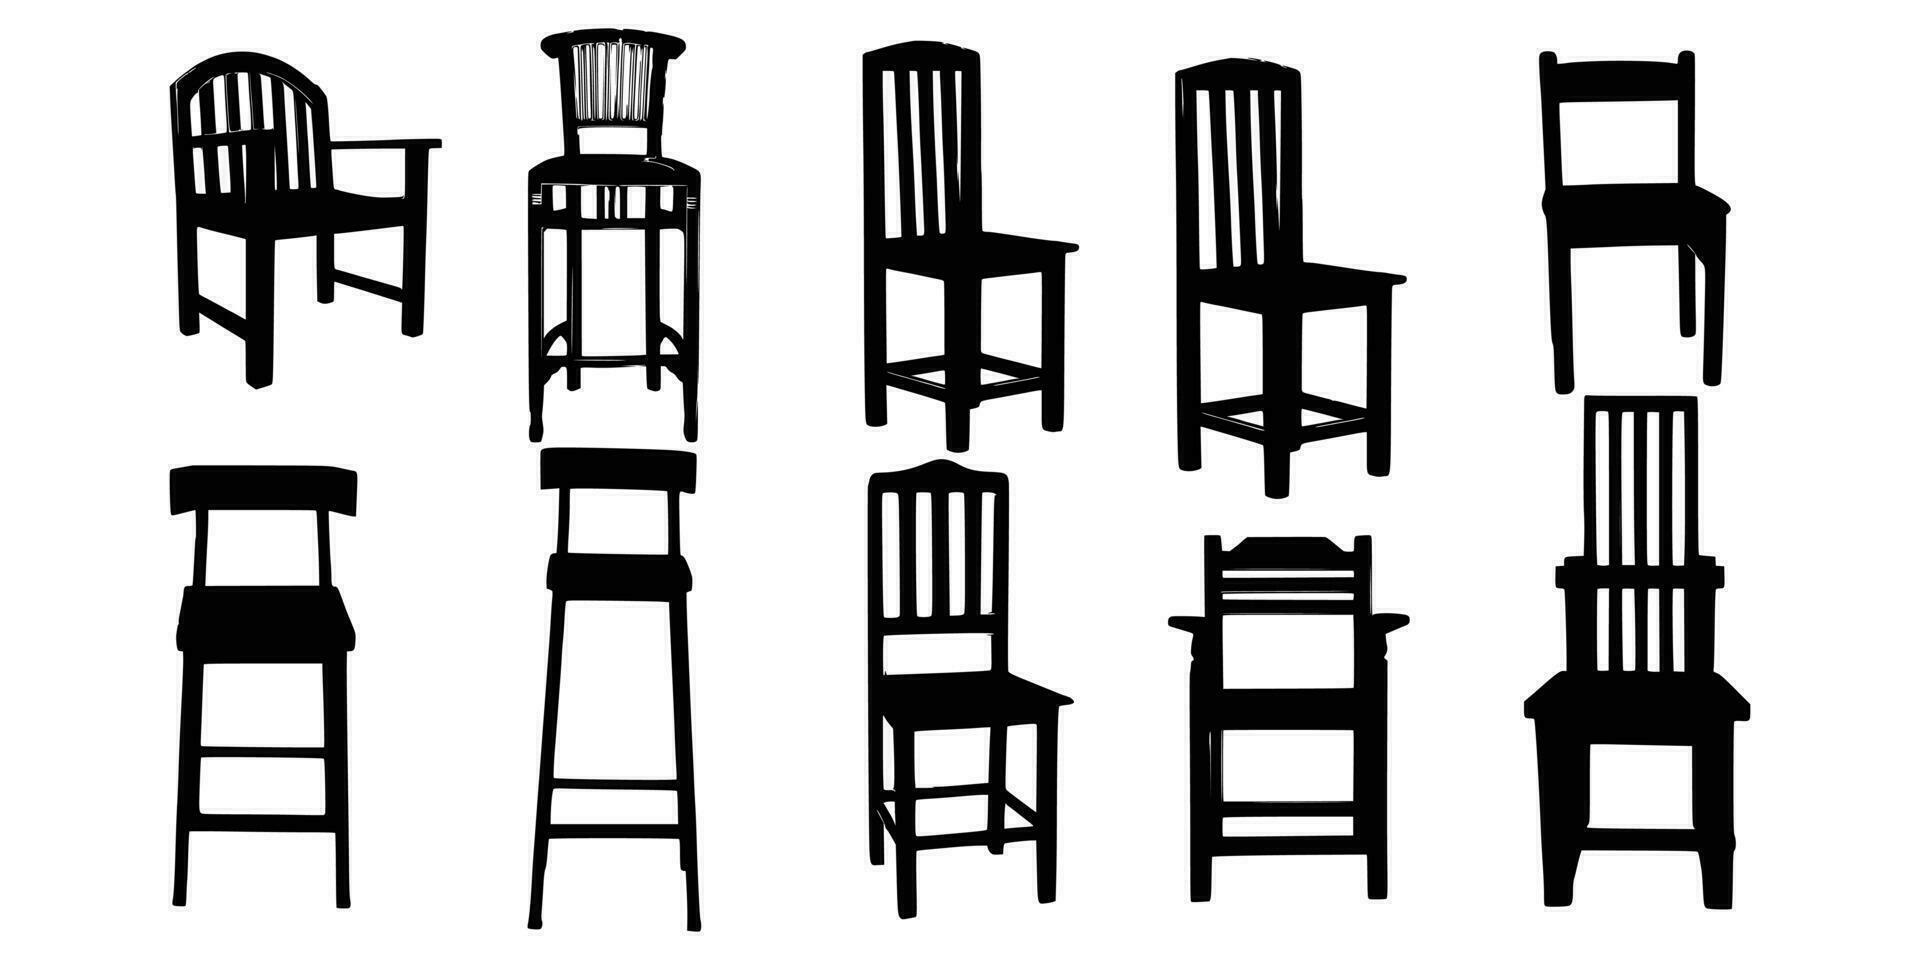 Ten Wooden Chairs Silhouette vector, Chair silhouette vector. vector